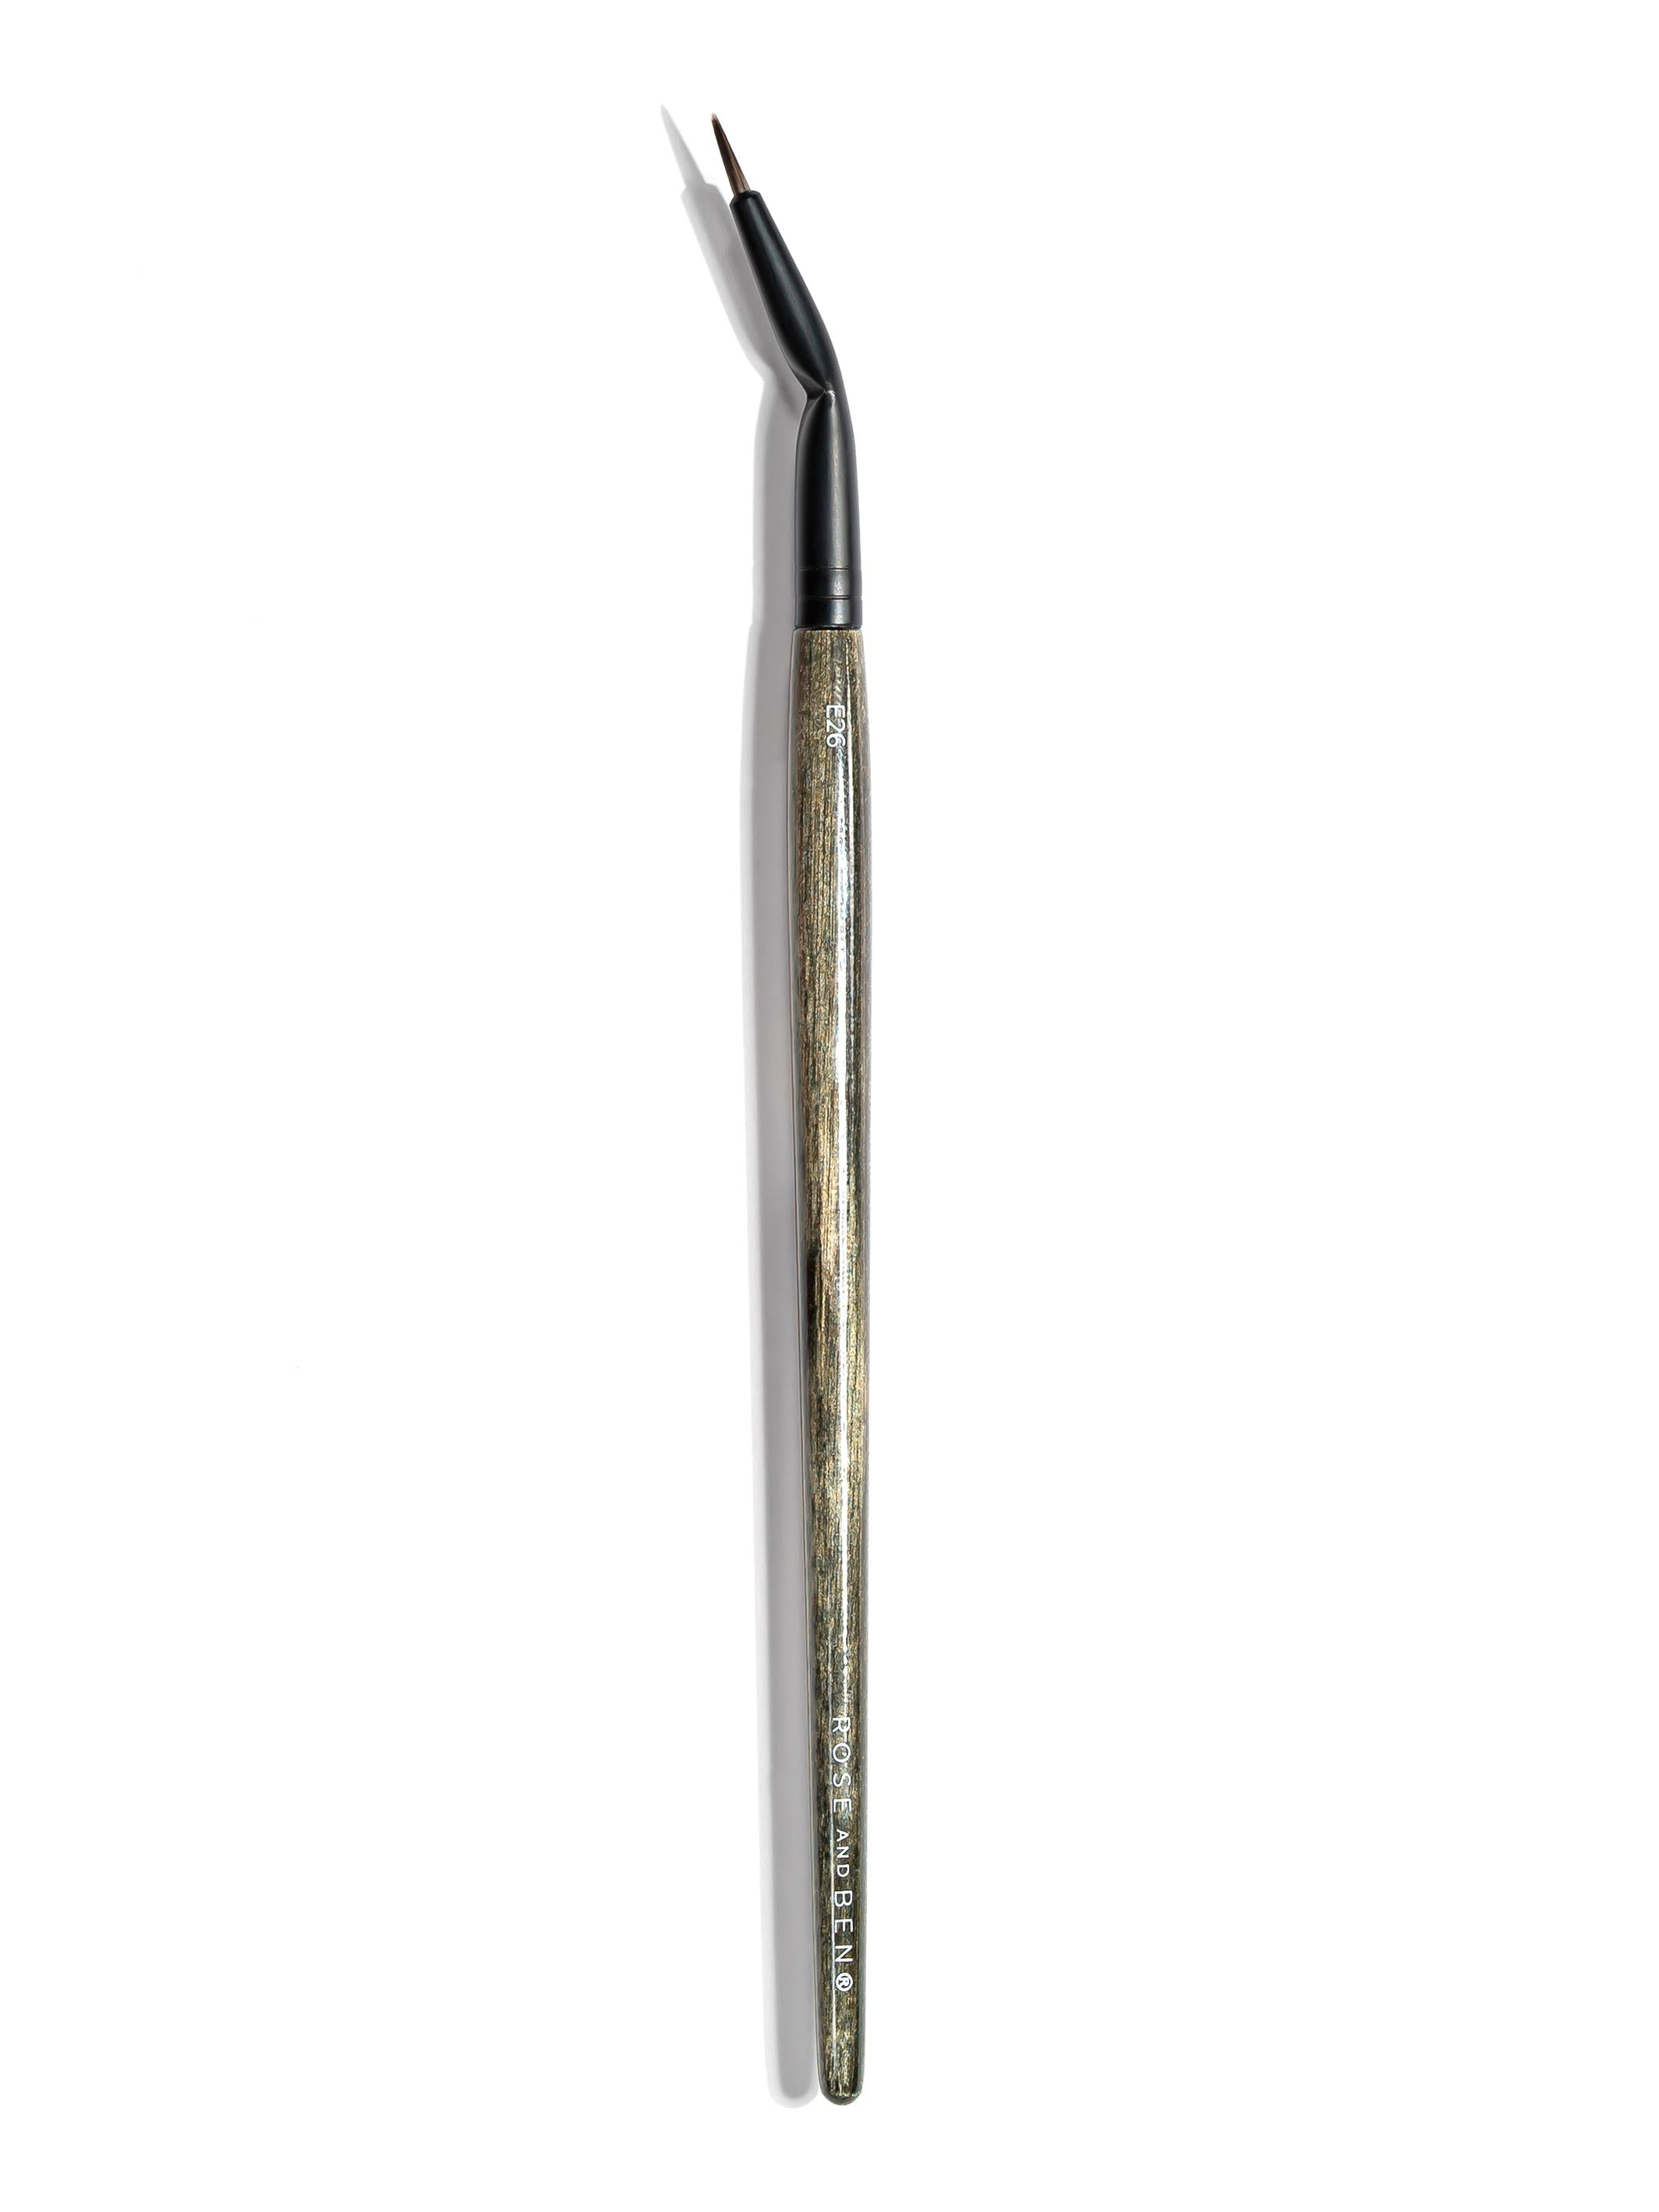 Pointed Liner Brush for Cream and Liquid Eye Liner